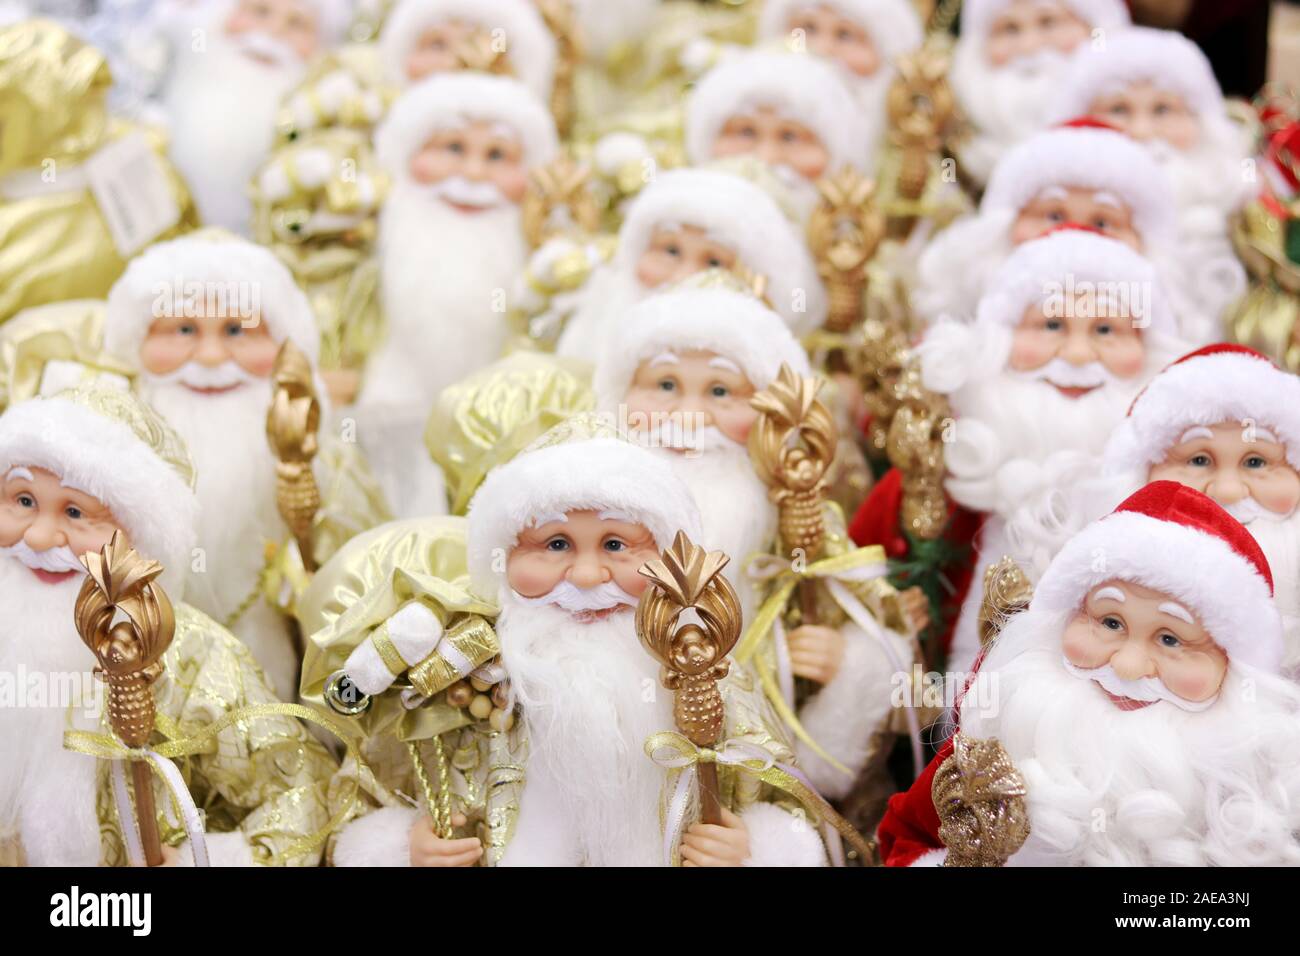 Christmas background filled with many Santa Claus dolls figures in red and gold suits stand in rows for winter holidays. Stock Photo